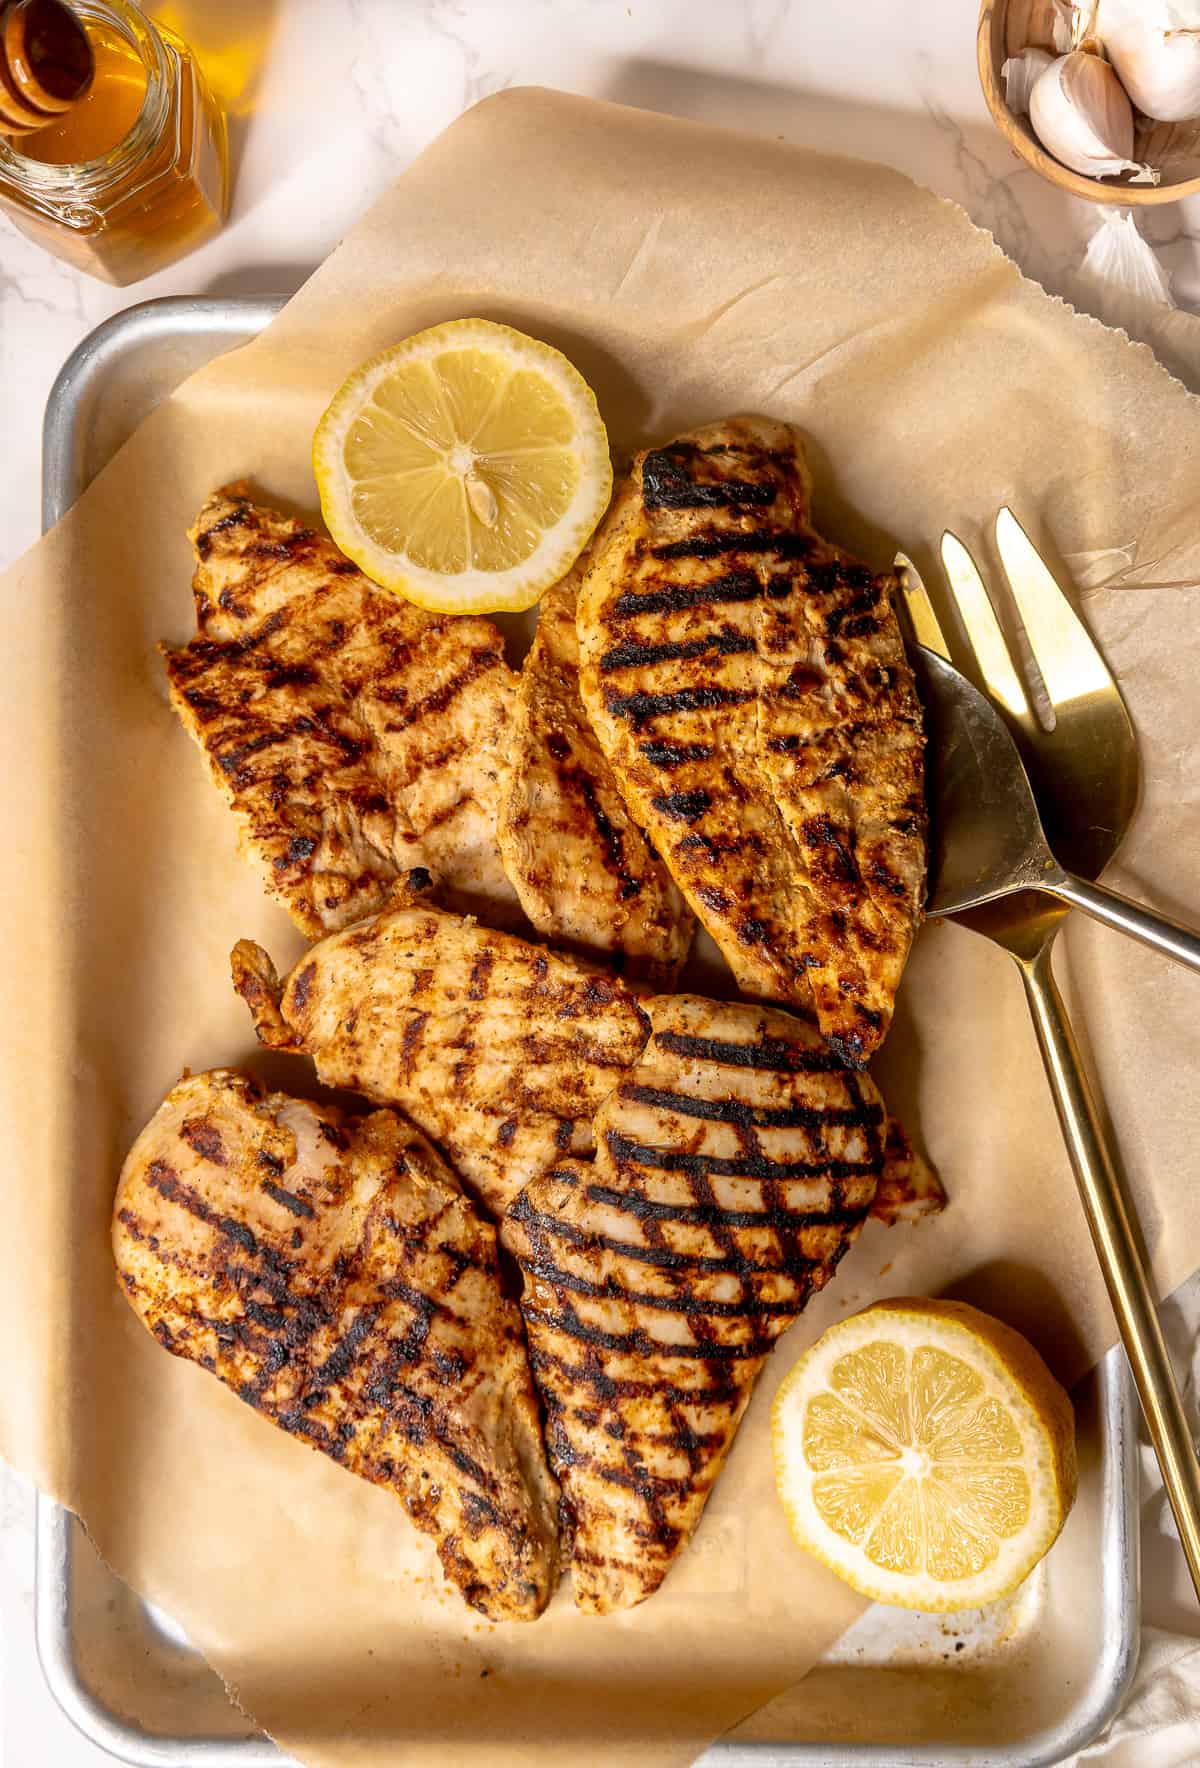 Grilled chicken breasts laid on a sheet pan, with two large serving forks and lemon to garnish.